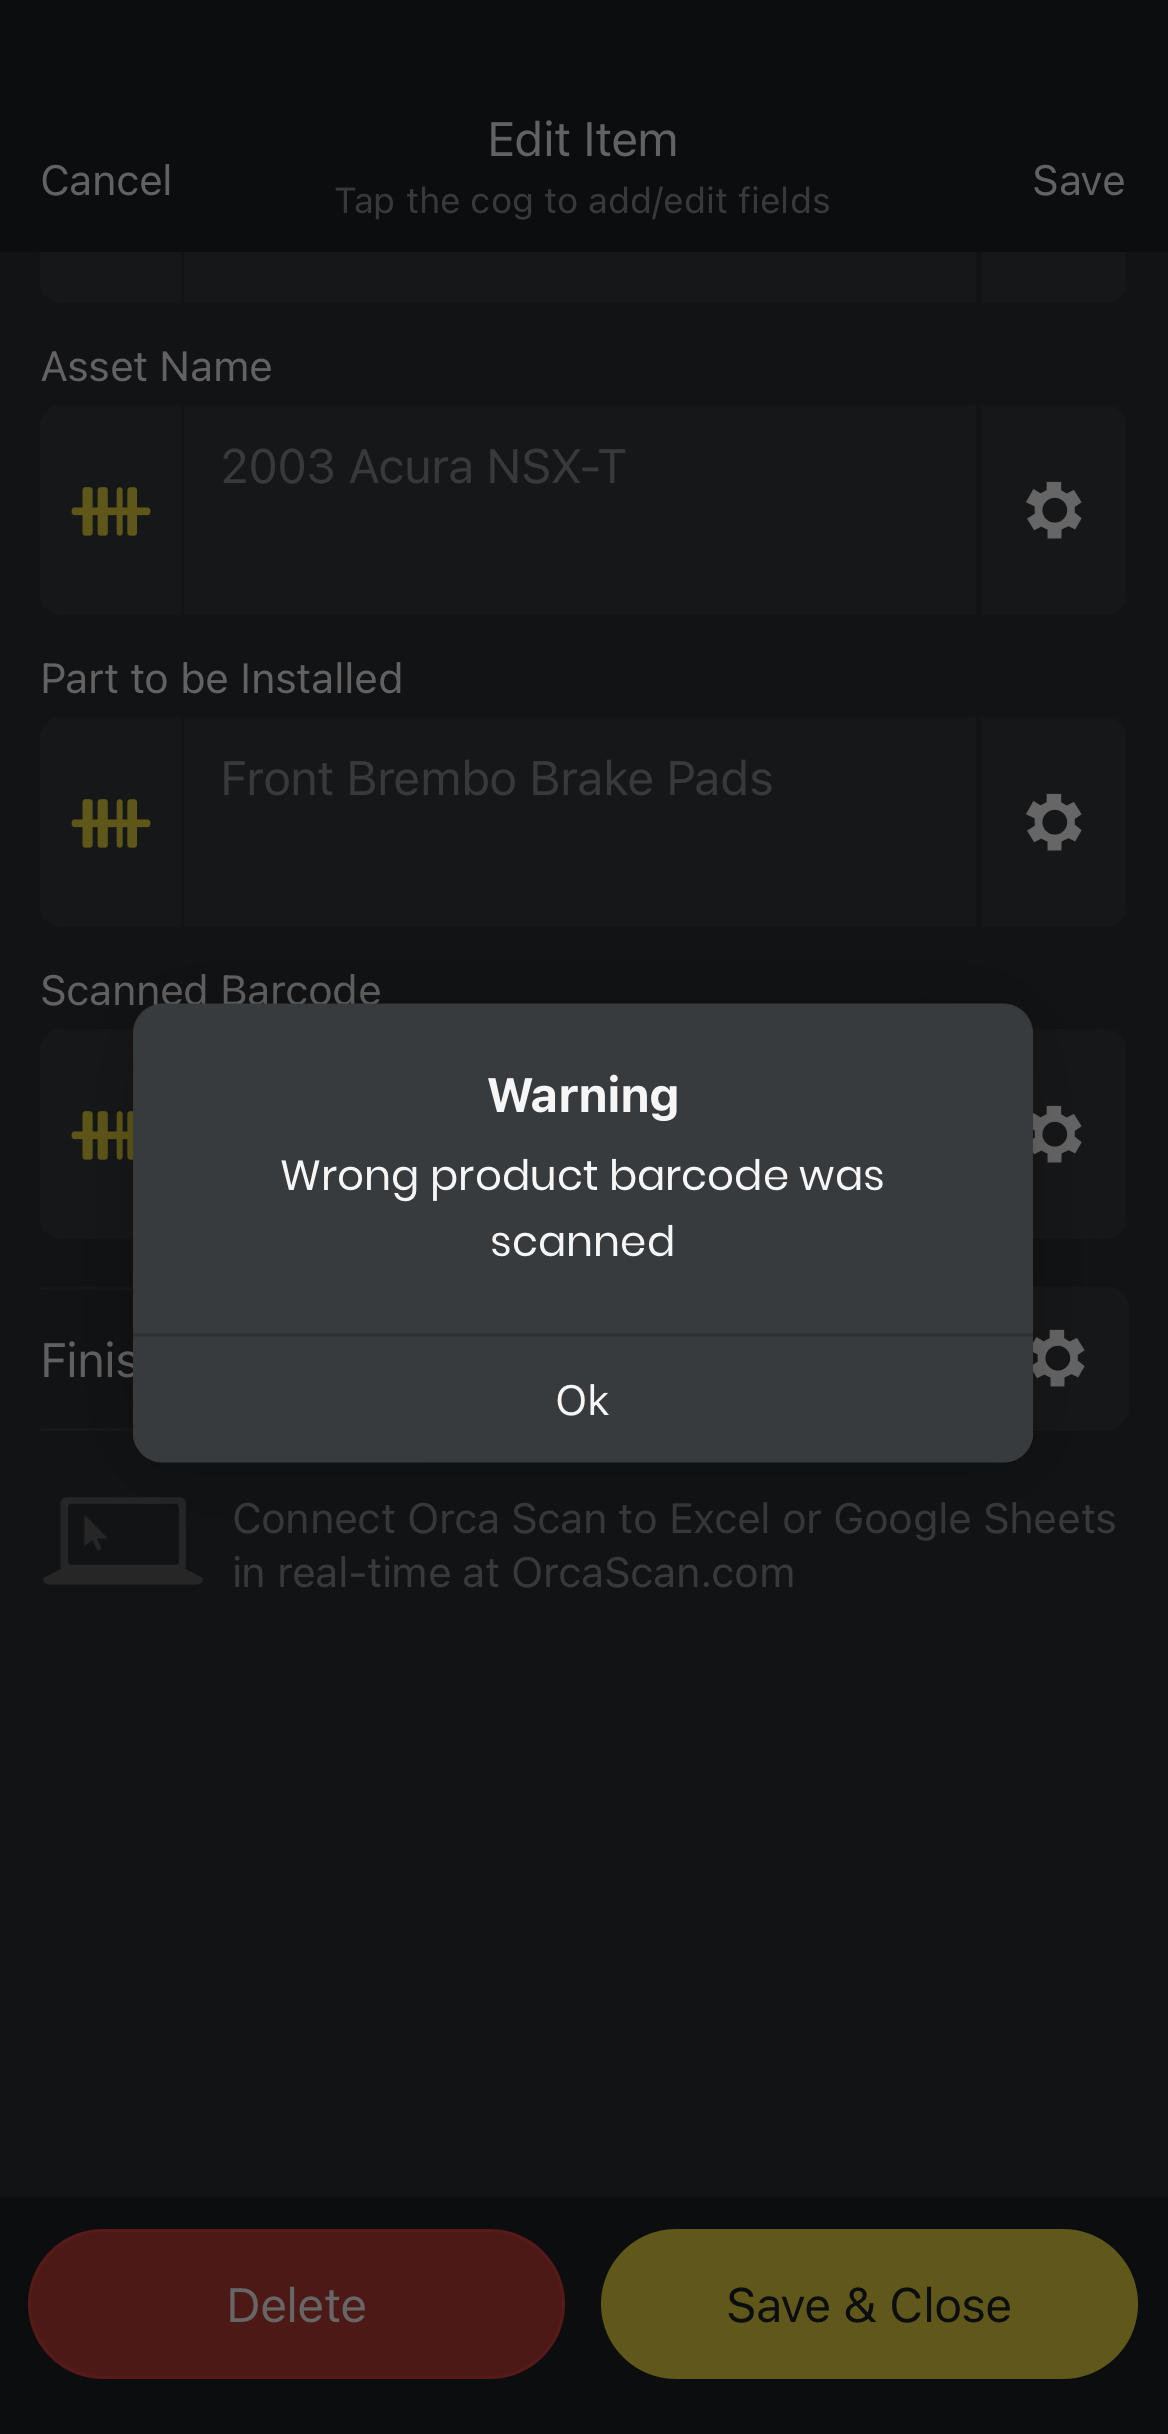 Get alerts when a scanned barcode doesn't match the one in your system.